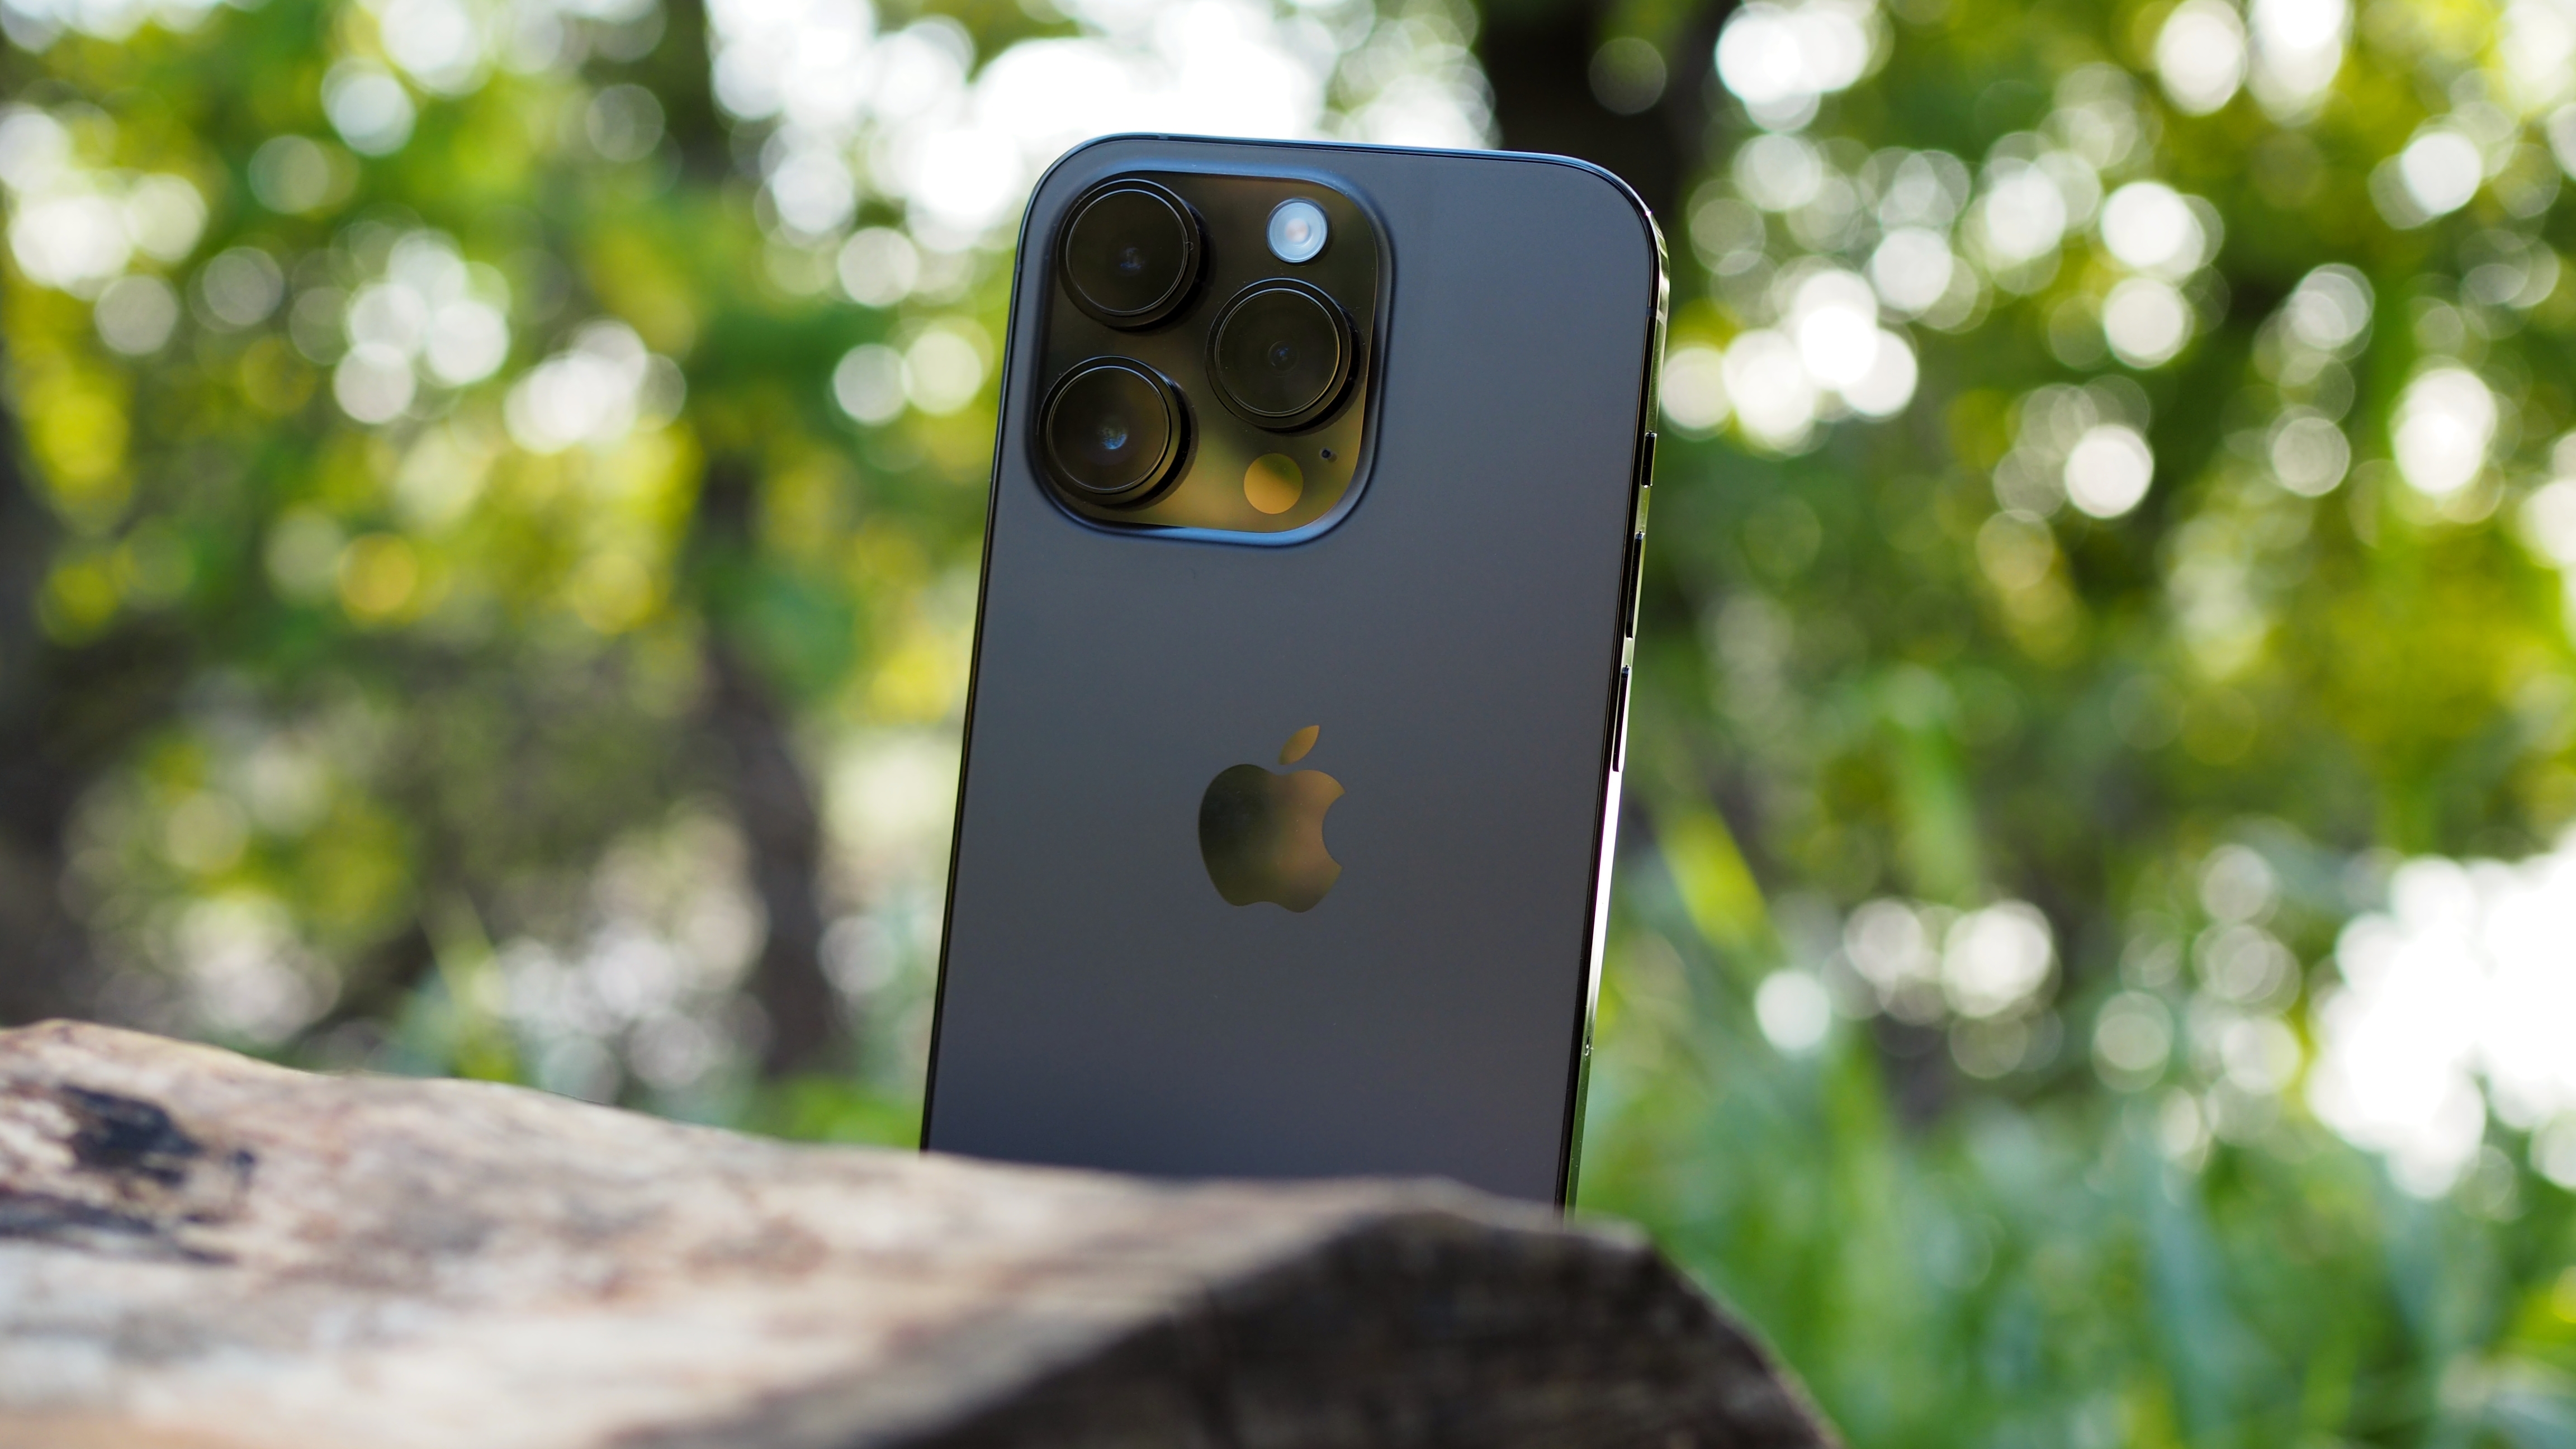 One of the iPhone's best camera apps now supports one of its best camera features